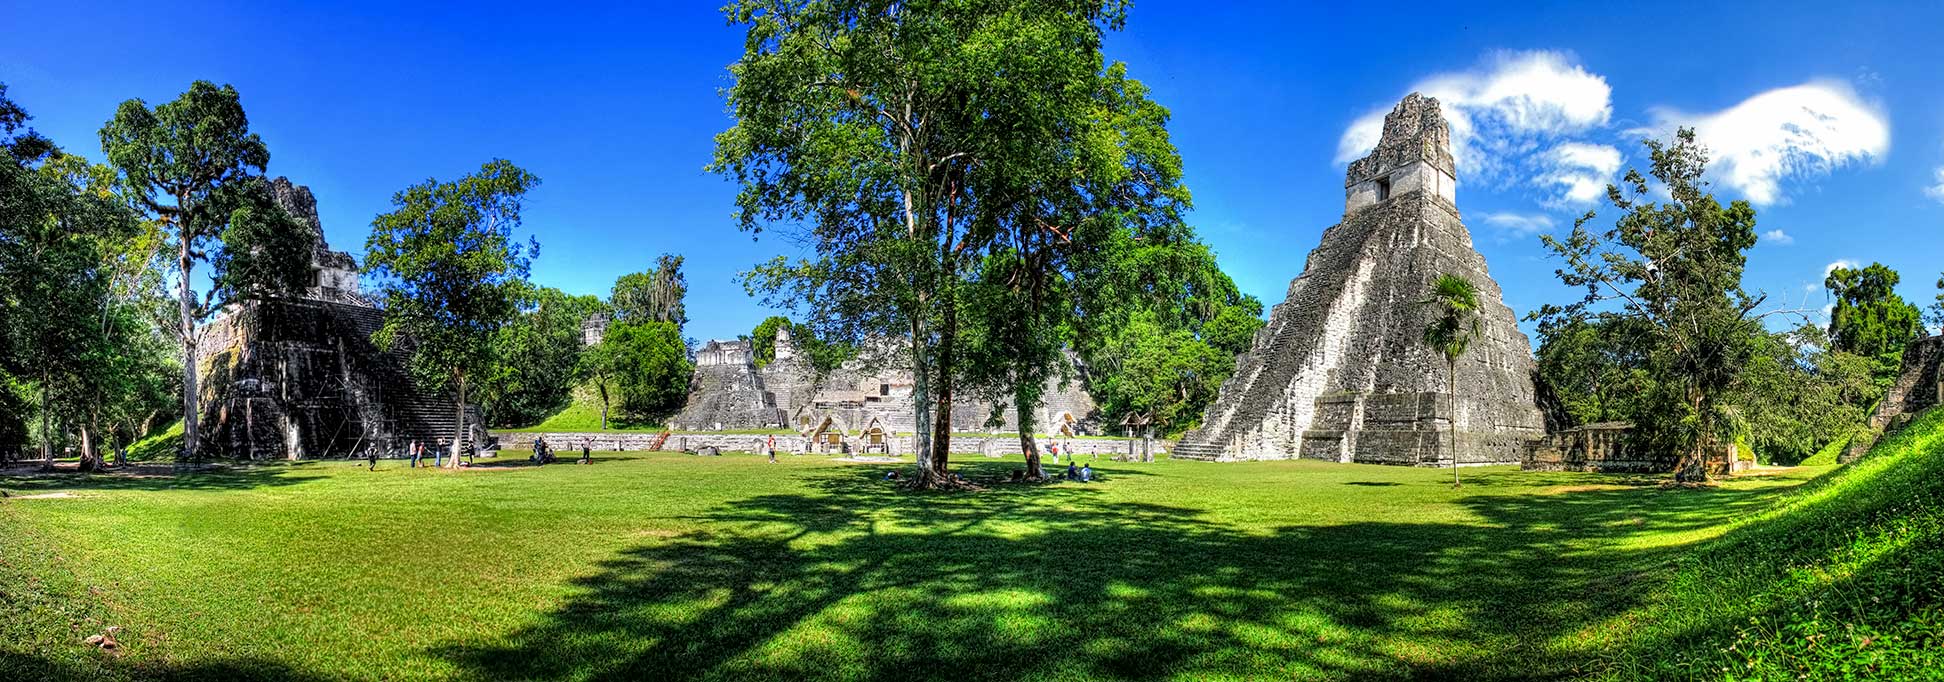 Great Plaza of the Tikal Temple in Guatemala.